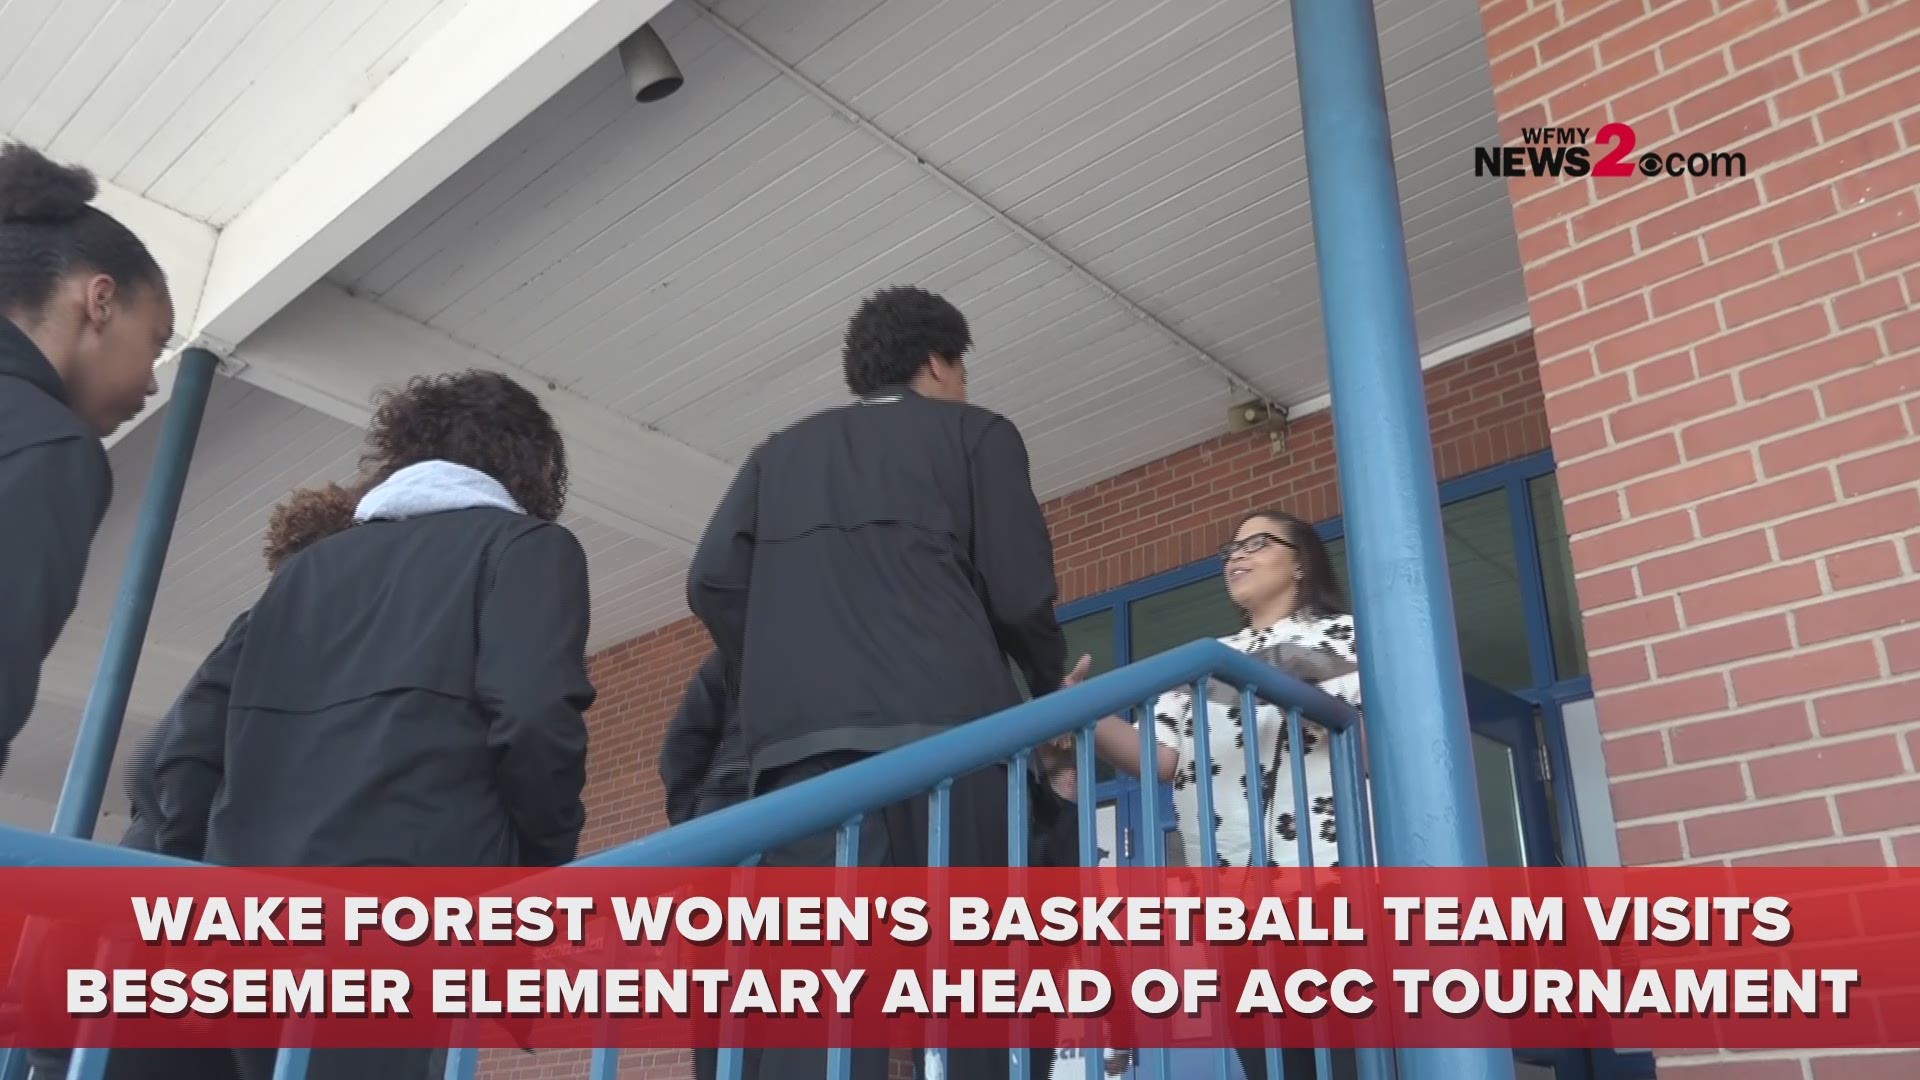 Wake Forest's women's basketball team spent the afternoon at Bessemer Elementary School in Greensboro talking to students about balancing academics and athletics and the importance of being a student over being an athlete ahead of the ACC tournament this week.